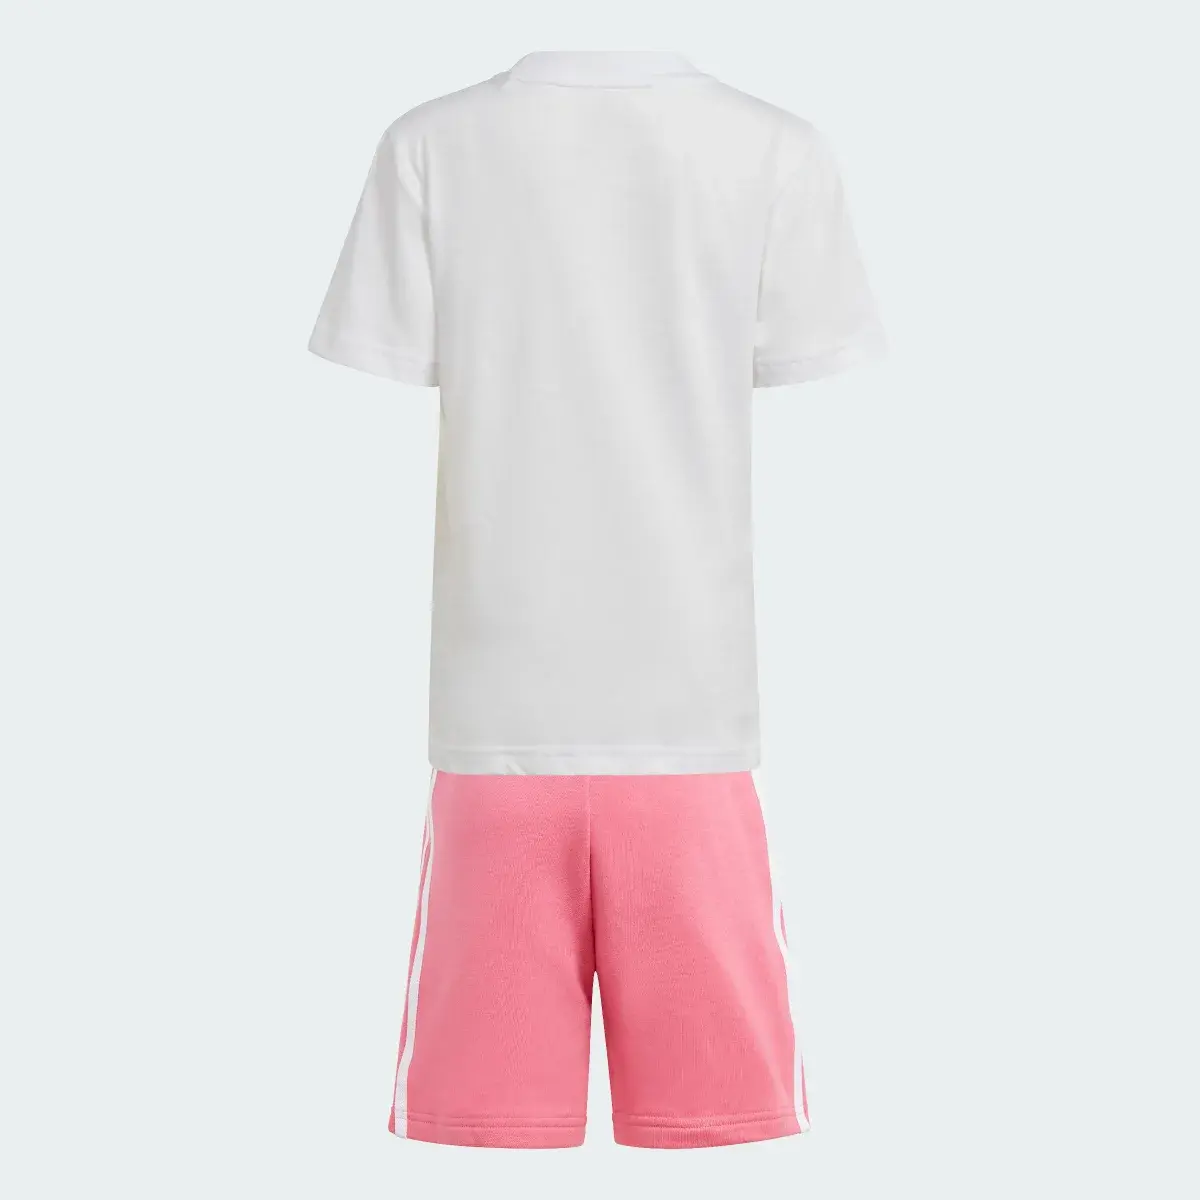 Adidas Completo adicolor Shorts and Tee. 2